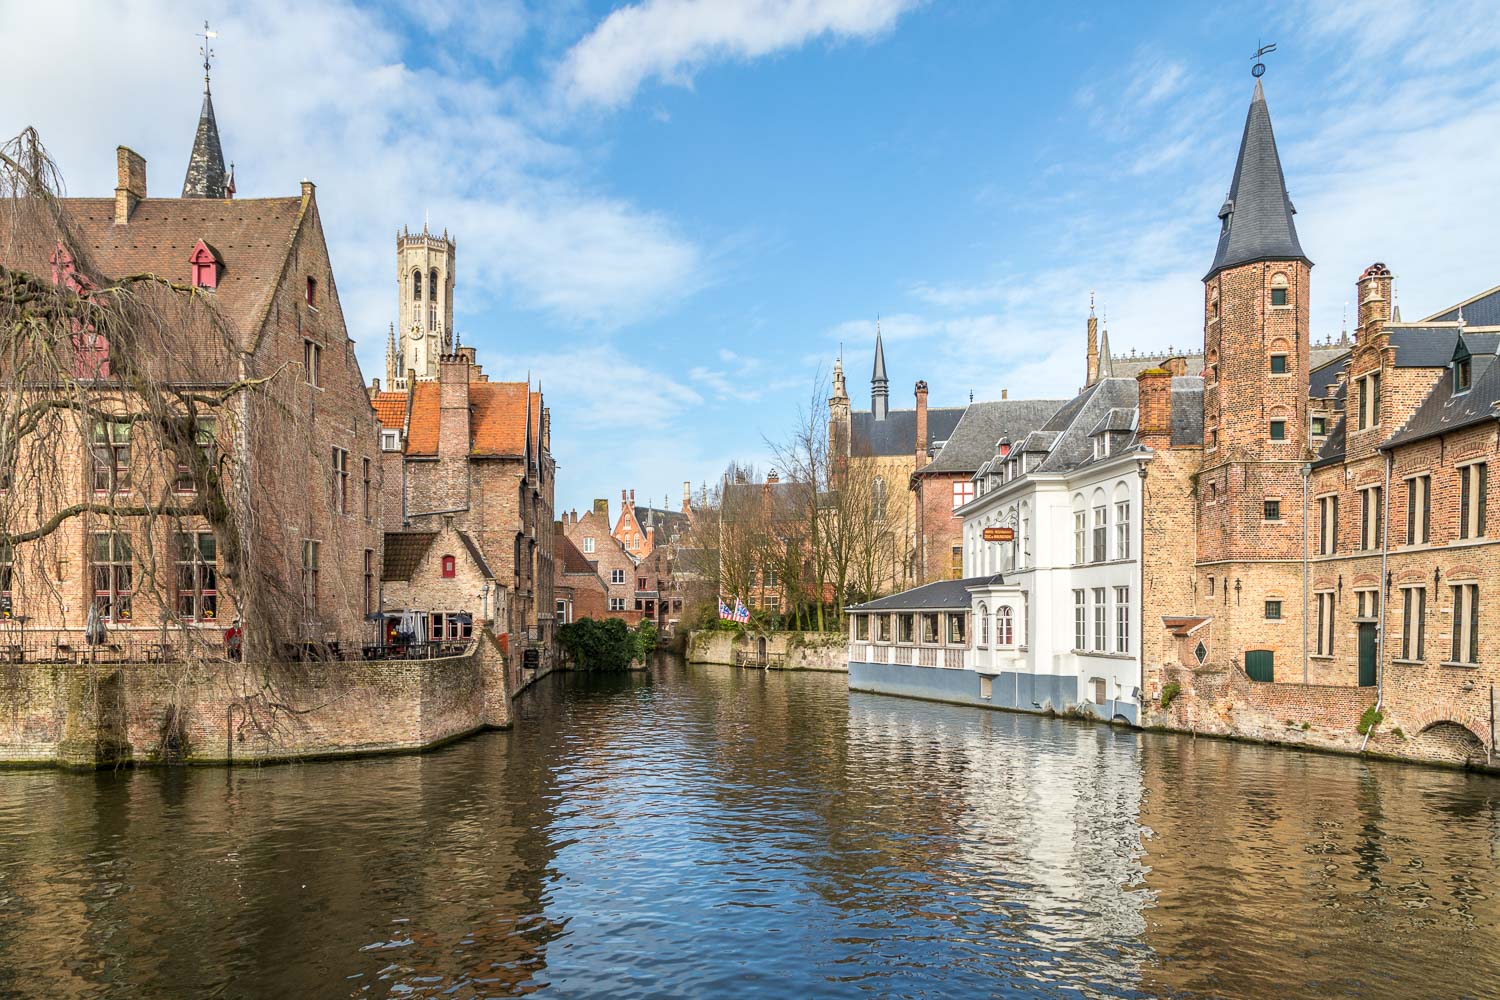 Bruges canal, The Belfry, Quay of the Rosary, Rozenhoedkaai